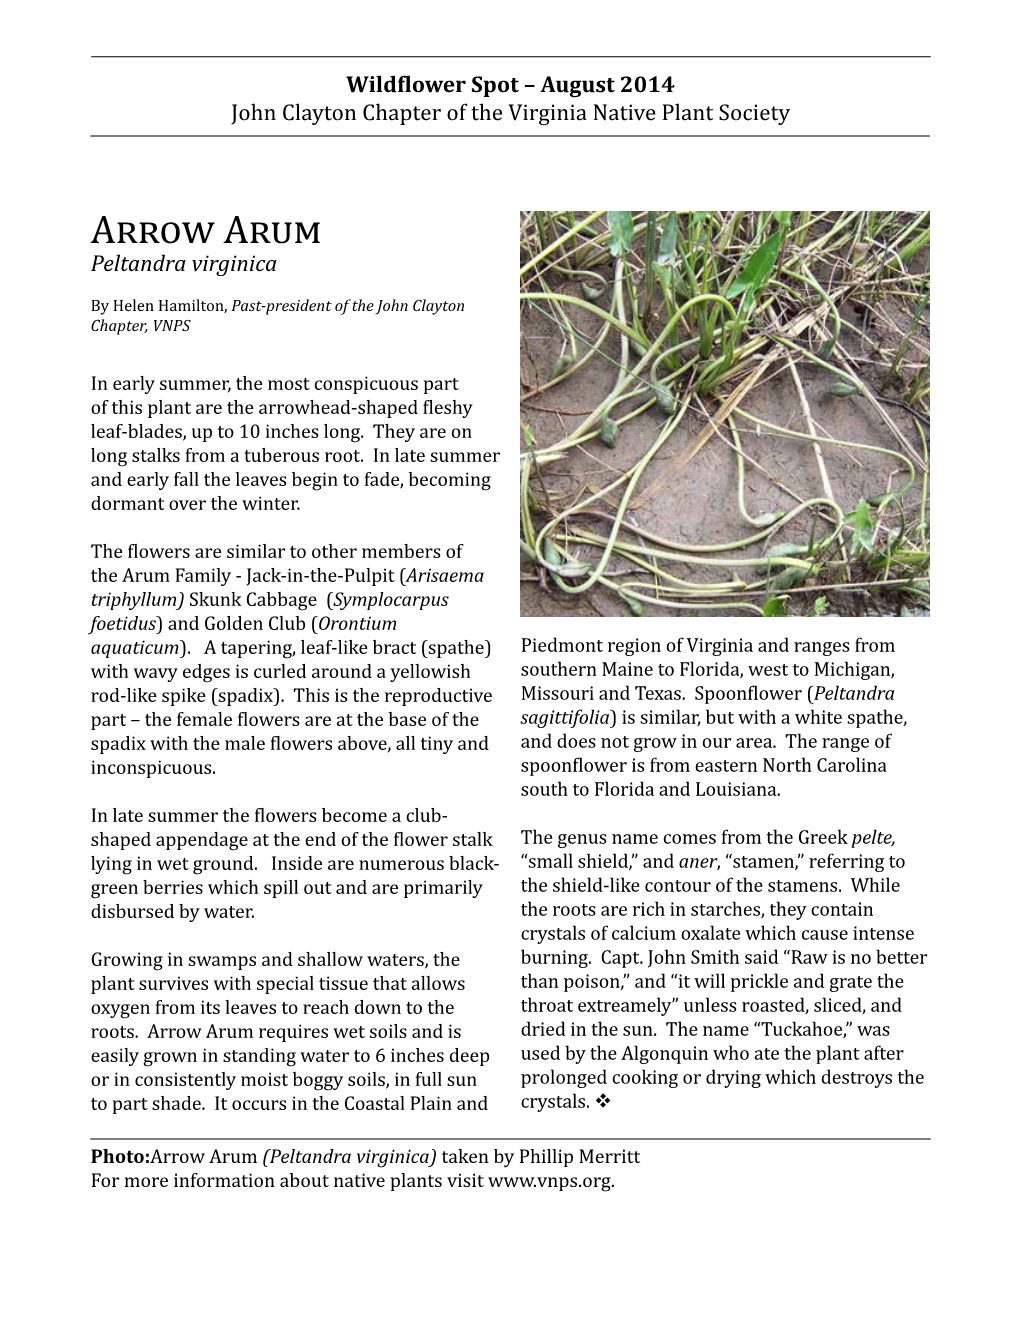 Arrow Arum Requires Wet Soils and Is Dried in the Sun